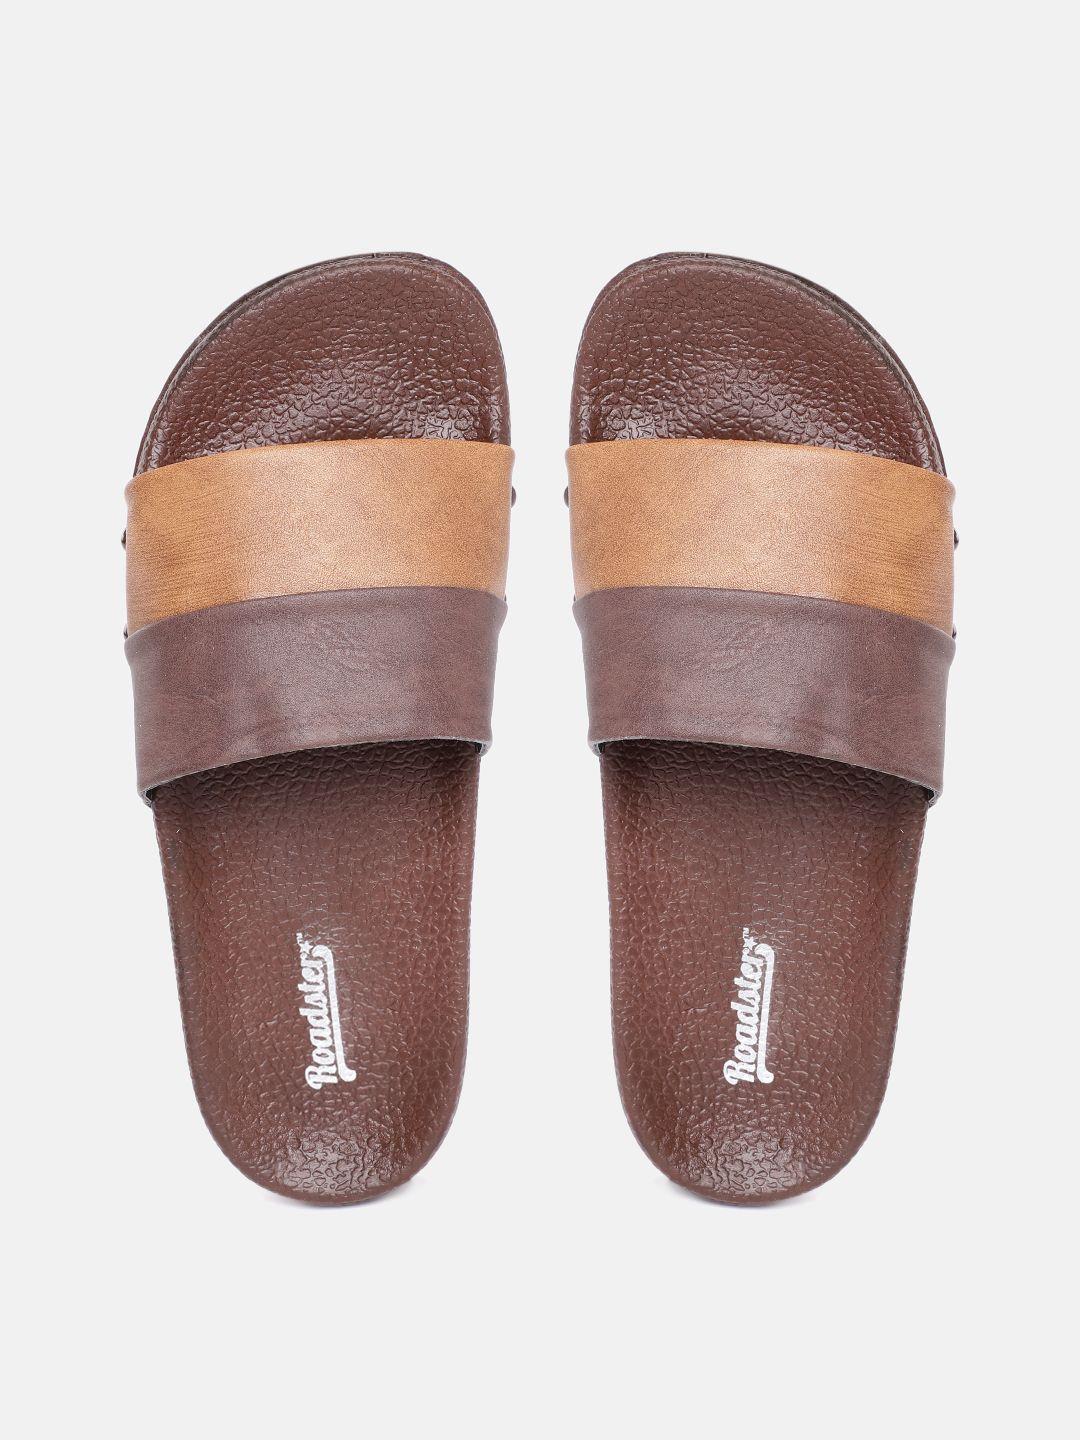 the roadster lifestyle co women brown colourblocked sliders